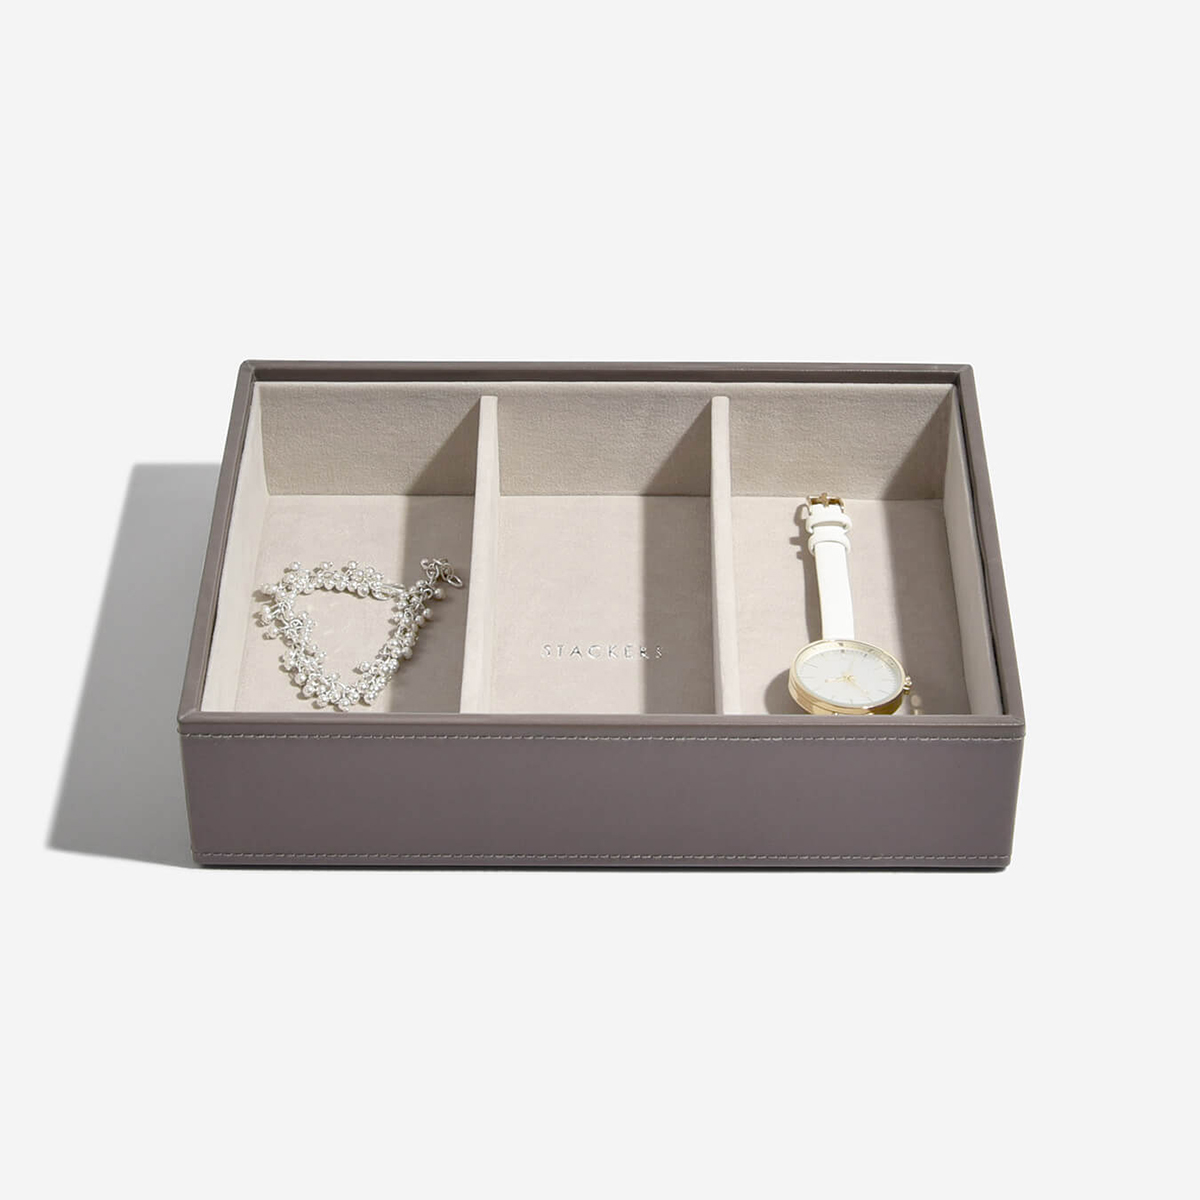 Stackers Premium Jewelry Box | The Container Store